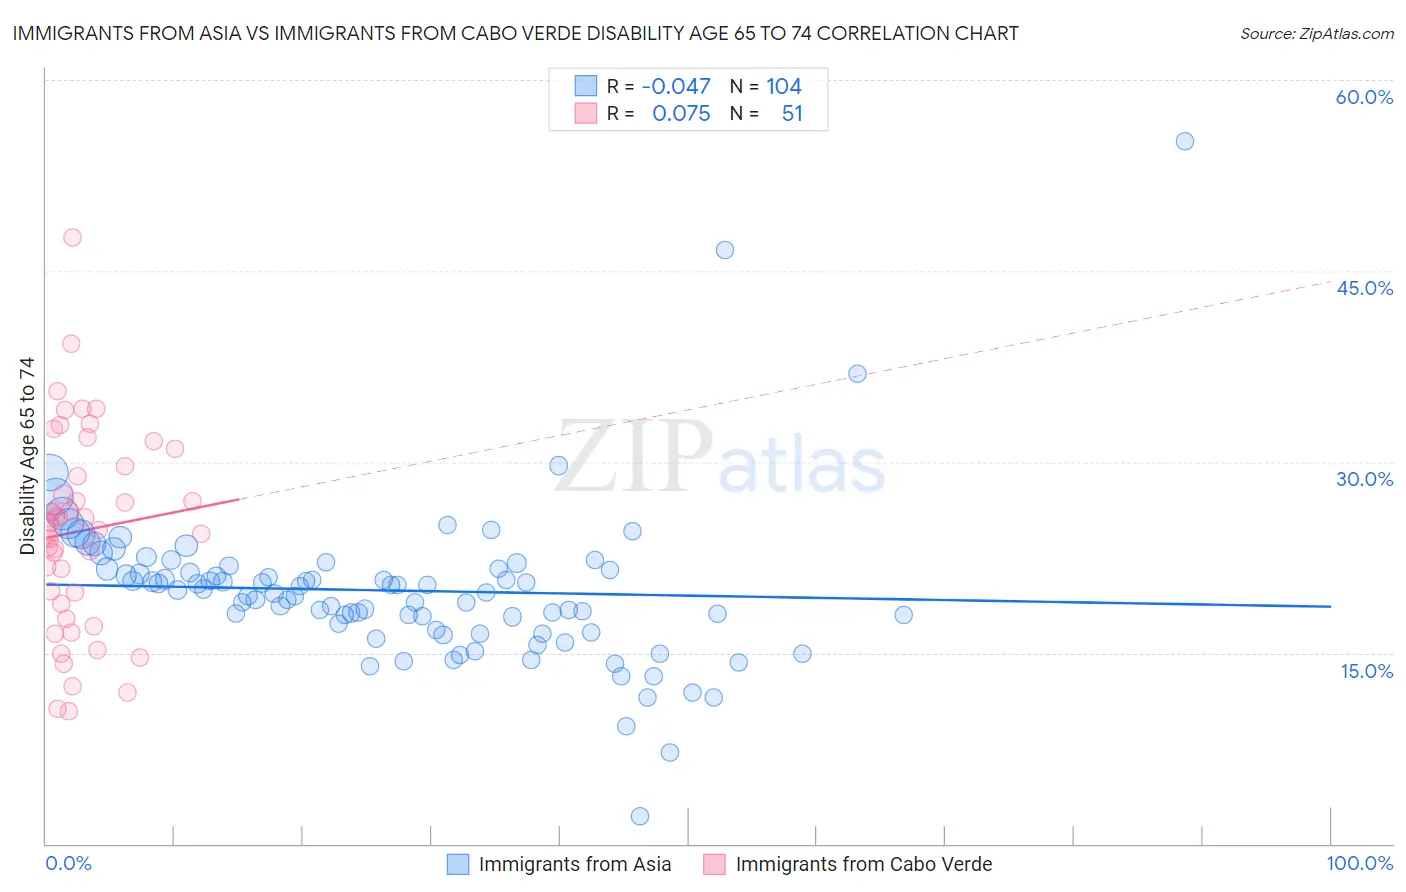 Immigrants from Asia vs Immigrants from Cabo Verde Disability Age 65 to 74